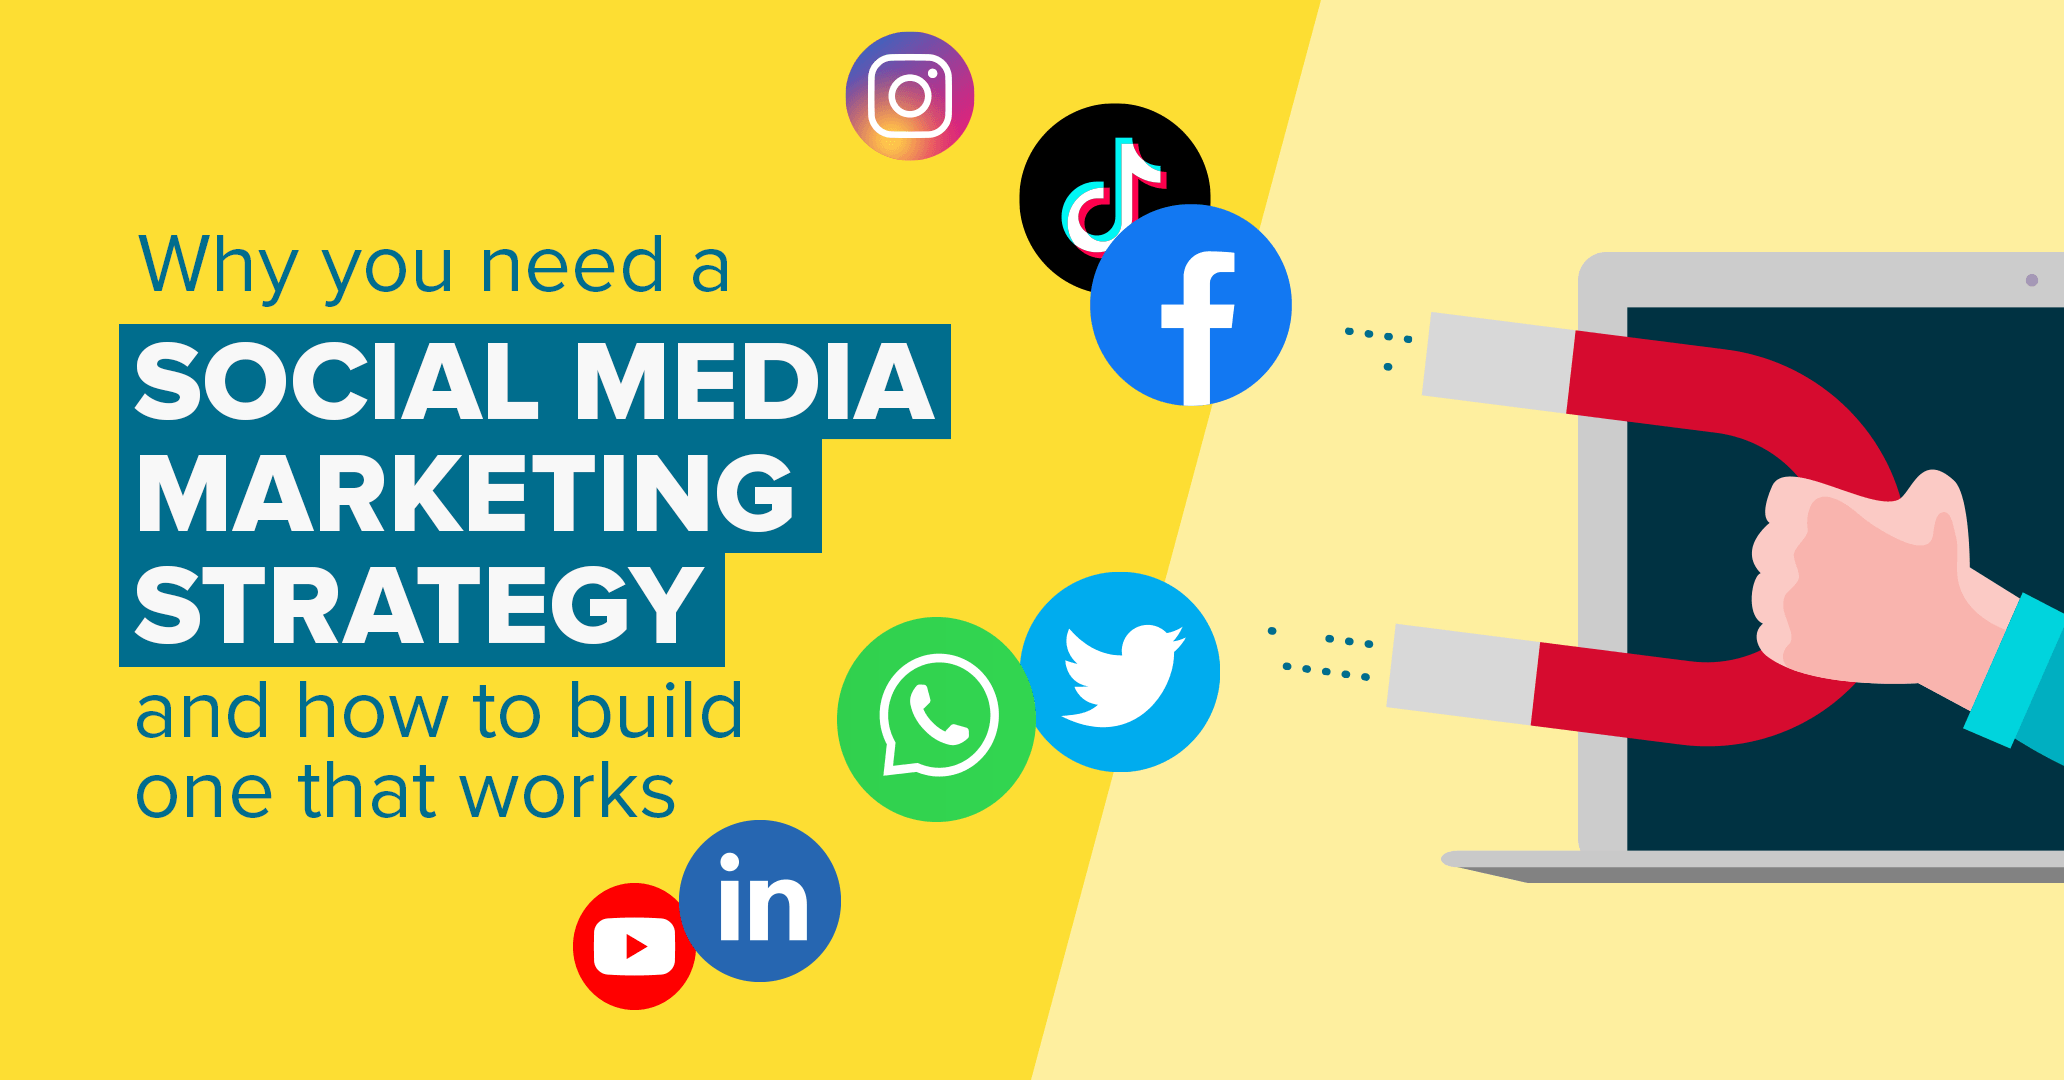 Why you need a Social Media Marketing Strategy and how to build one that works.